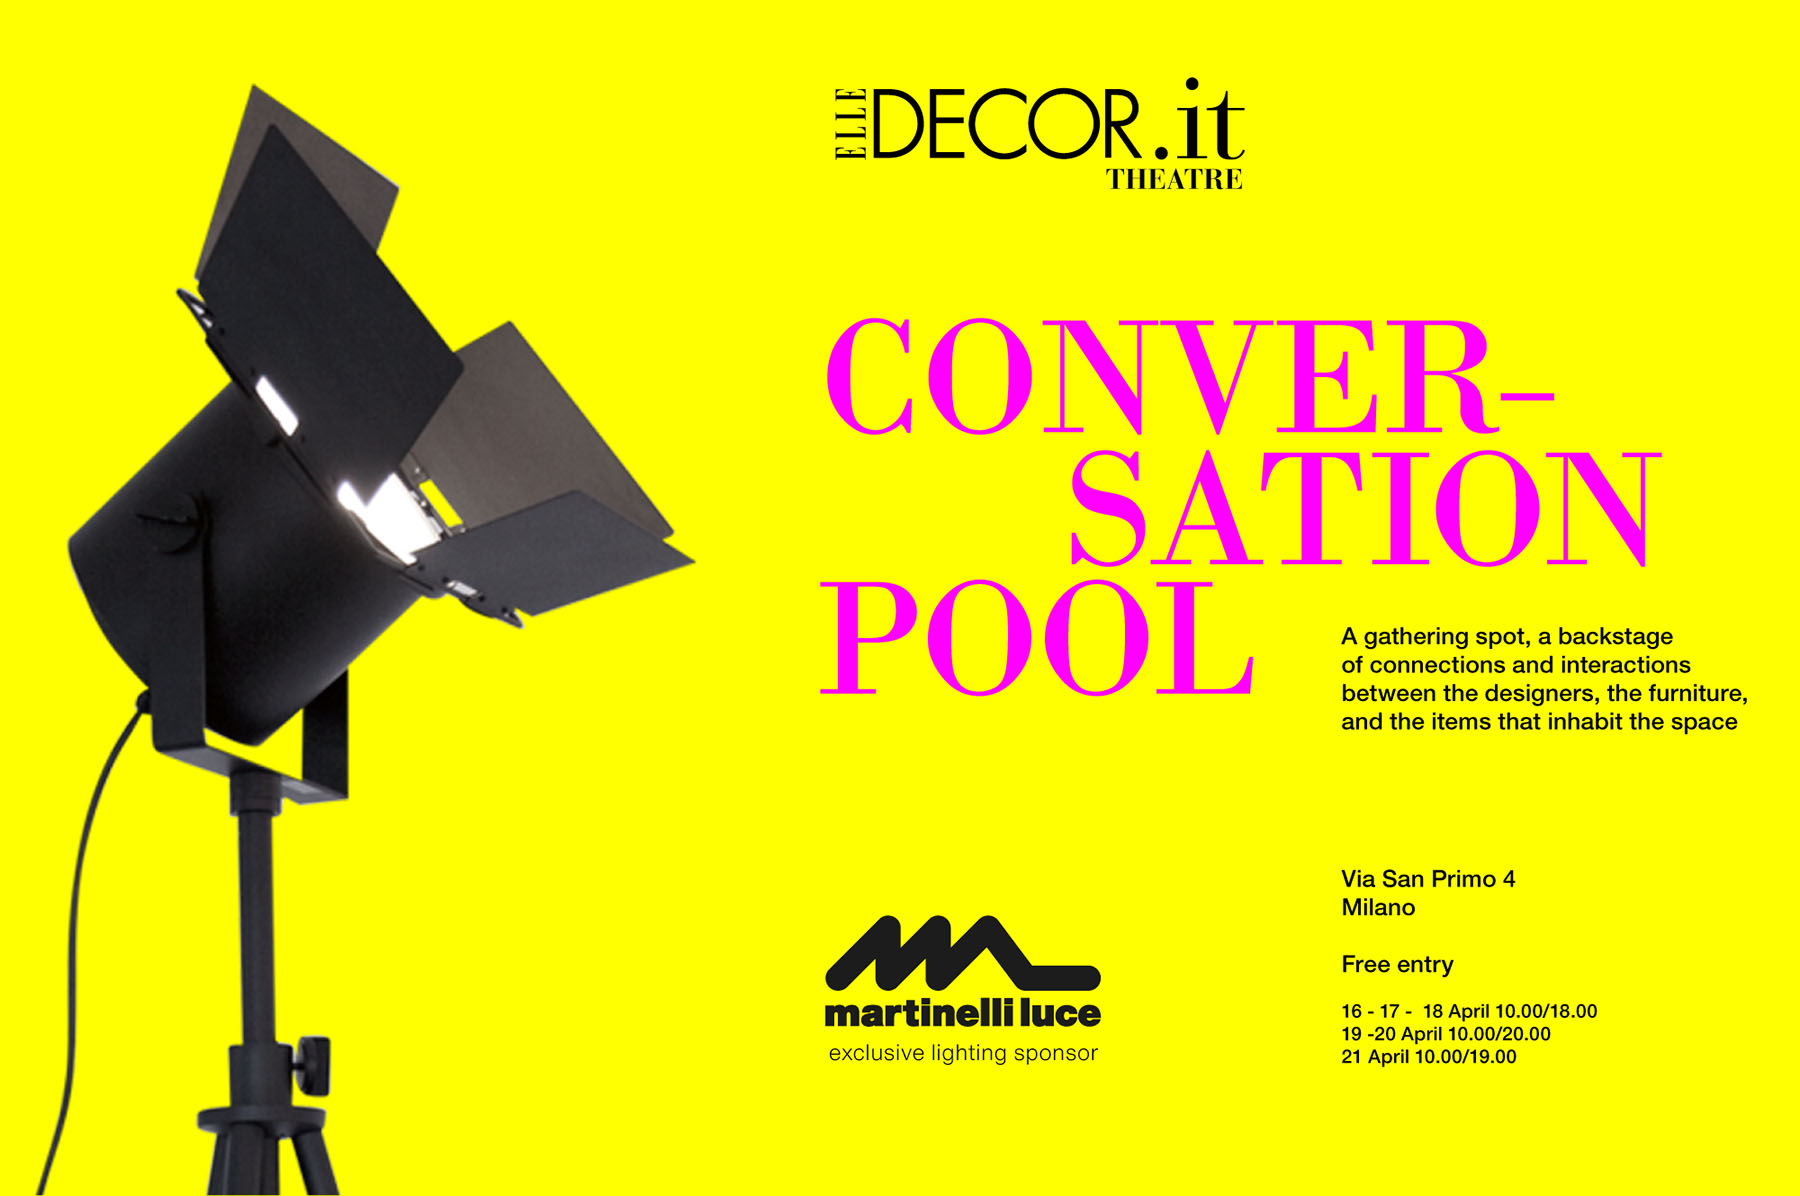 Elledecor.it and Martinelli Luce at the Fuorisalone in Milan